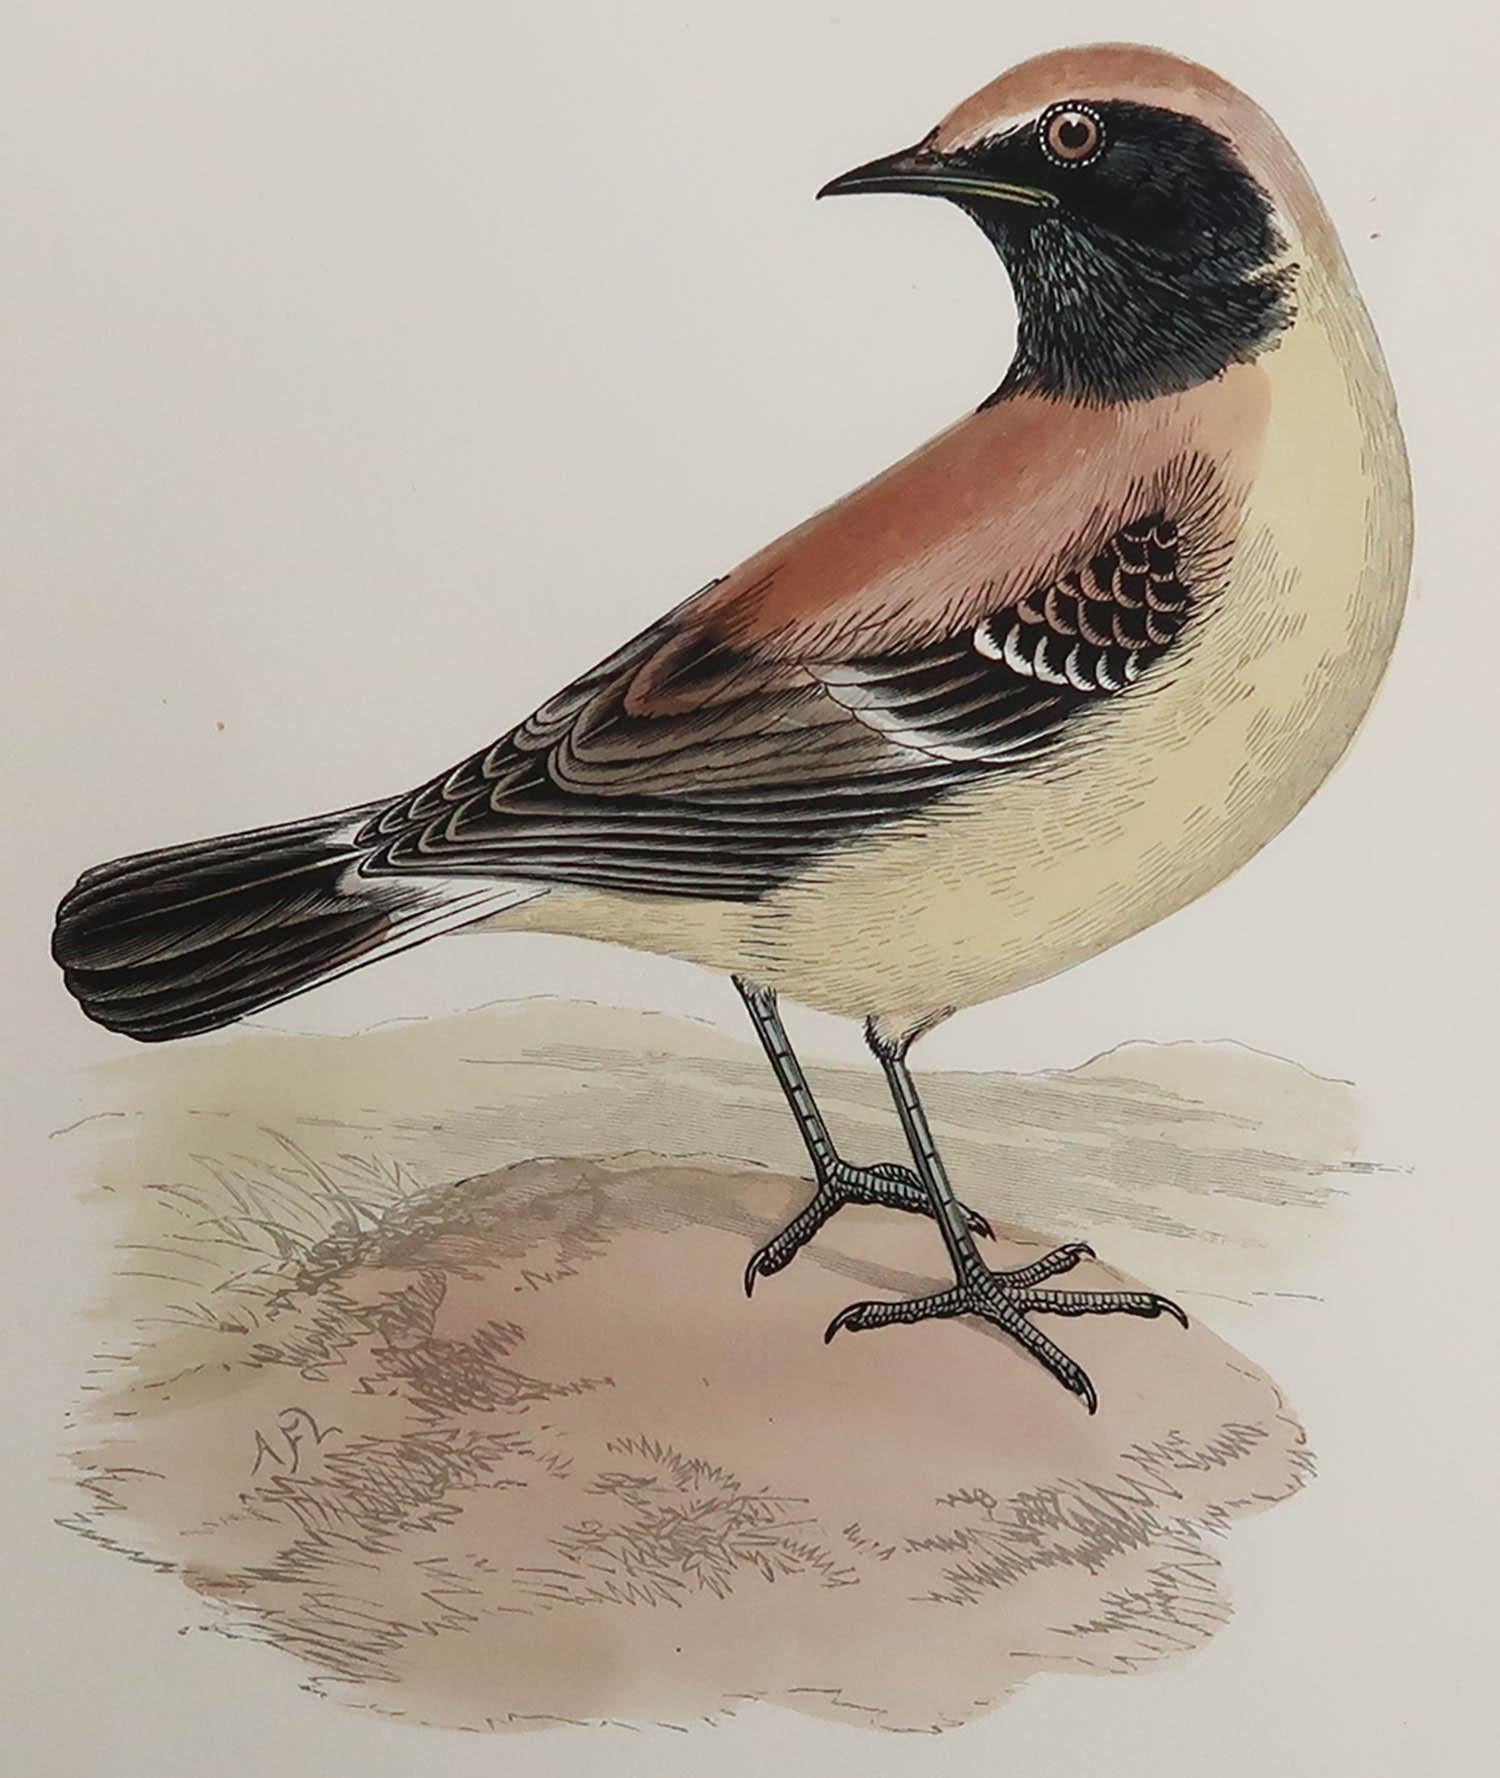 Great image of a desert wheatear

Unframed. It gives you the option of perhaps making a set up using your own choice of frames.

Lithograph after Alexander Francis Lydon.

Original hand colour

Published, circa 1880

Free